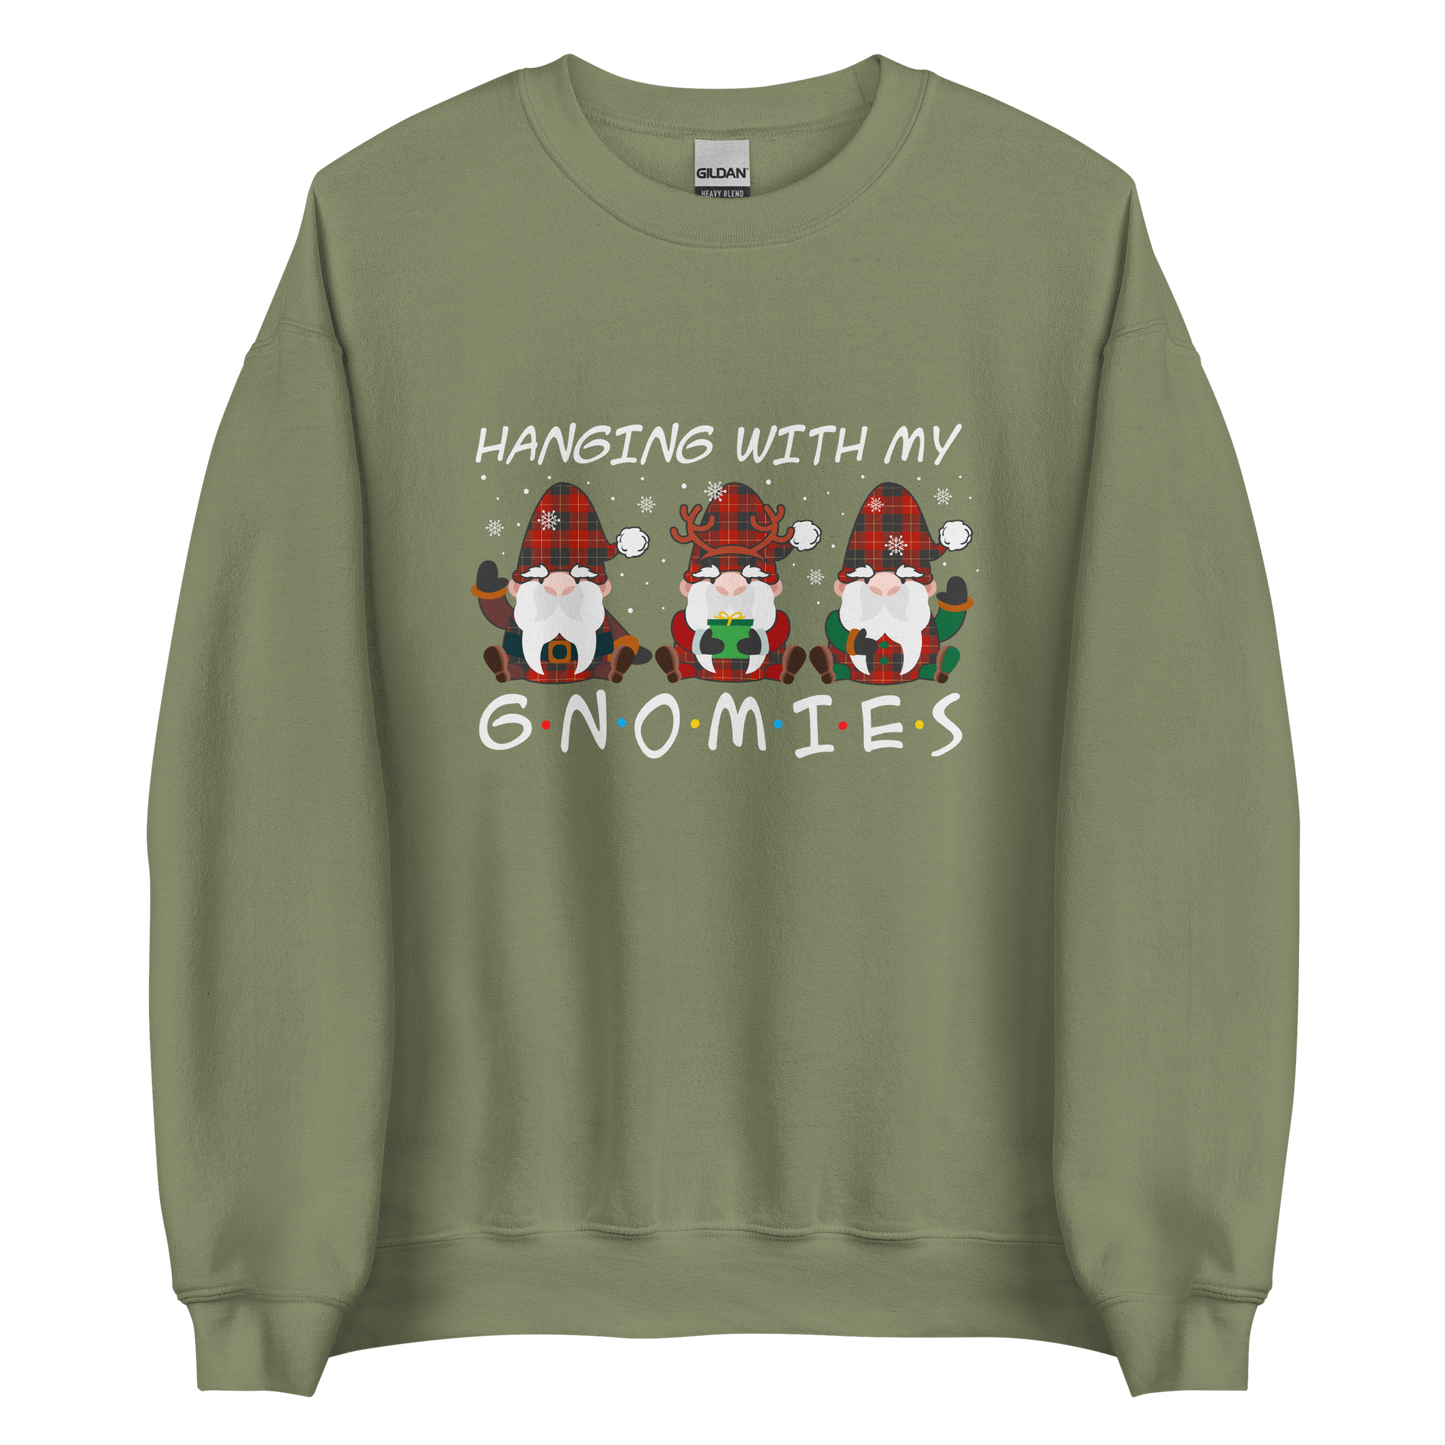 Military Green Christmas Gnome Sweatshirt featuring a delight Hanging With My Gnomies graphic on the chest - Funny Christmas Graphic Gnome Sweatshirts - Boozy Fox